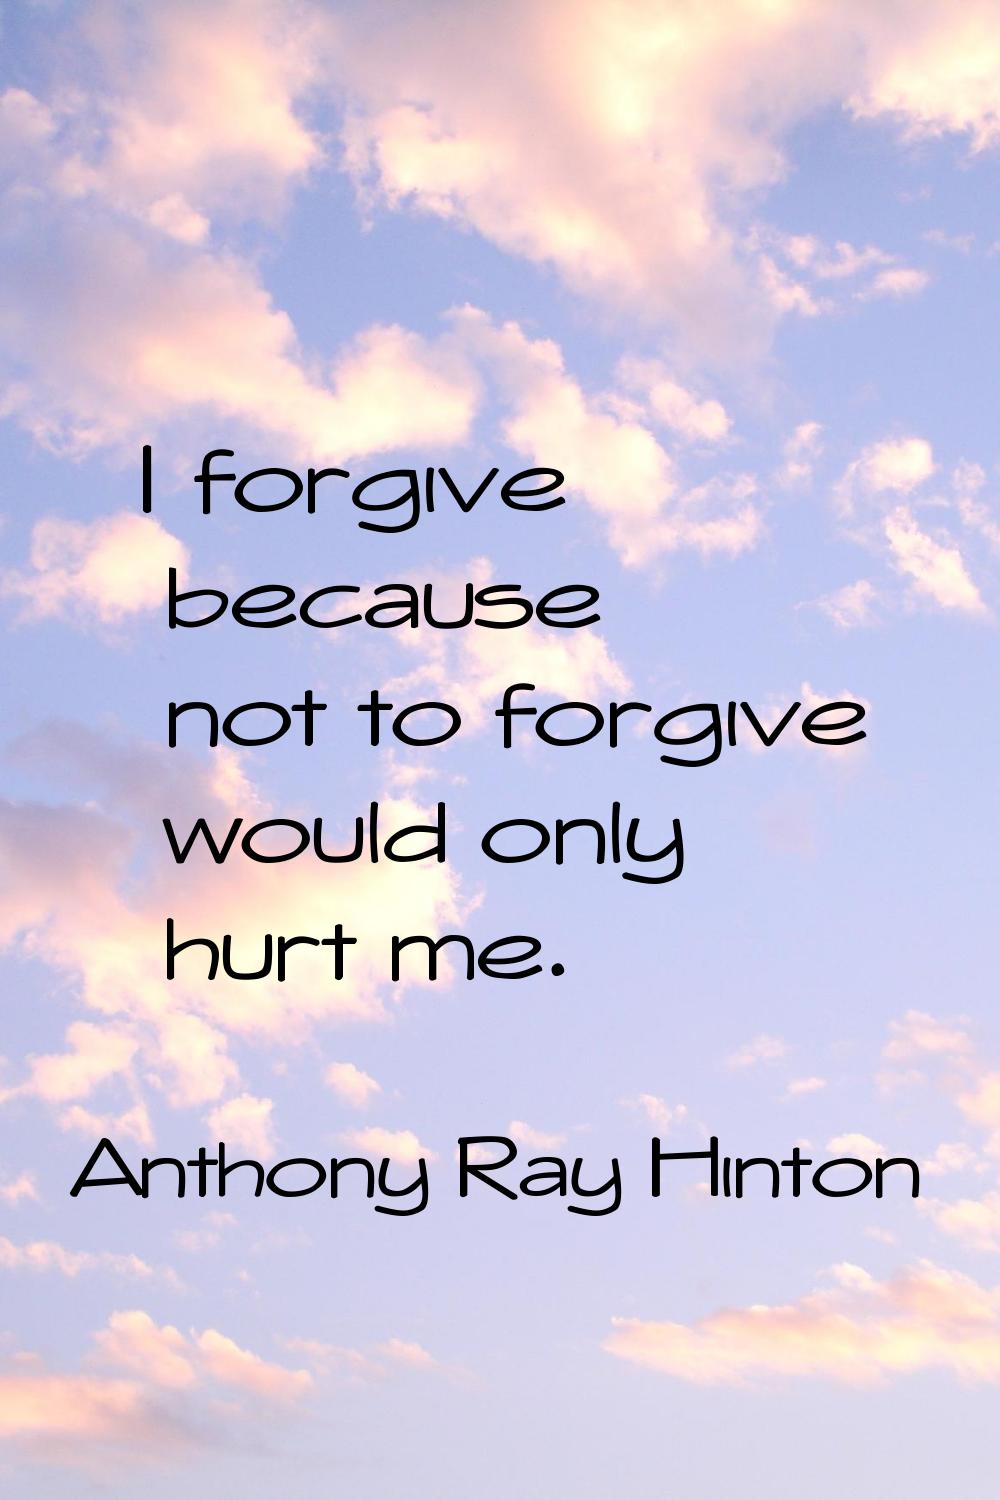 I forgive because not to forgive would only hurt me.